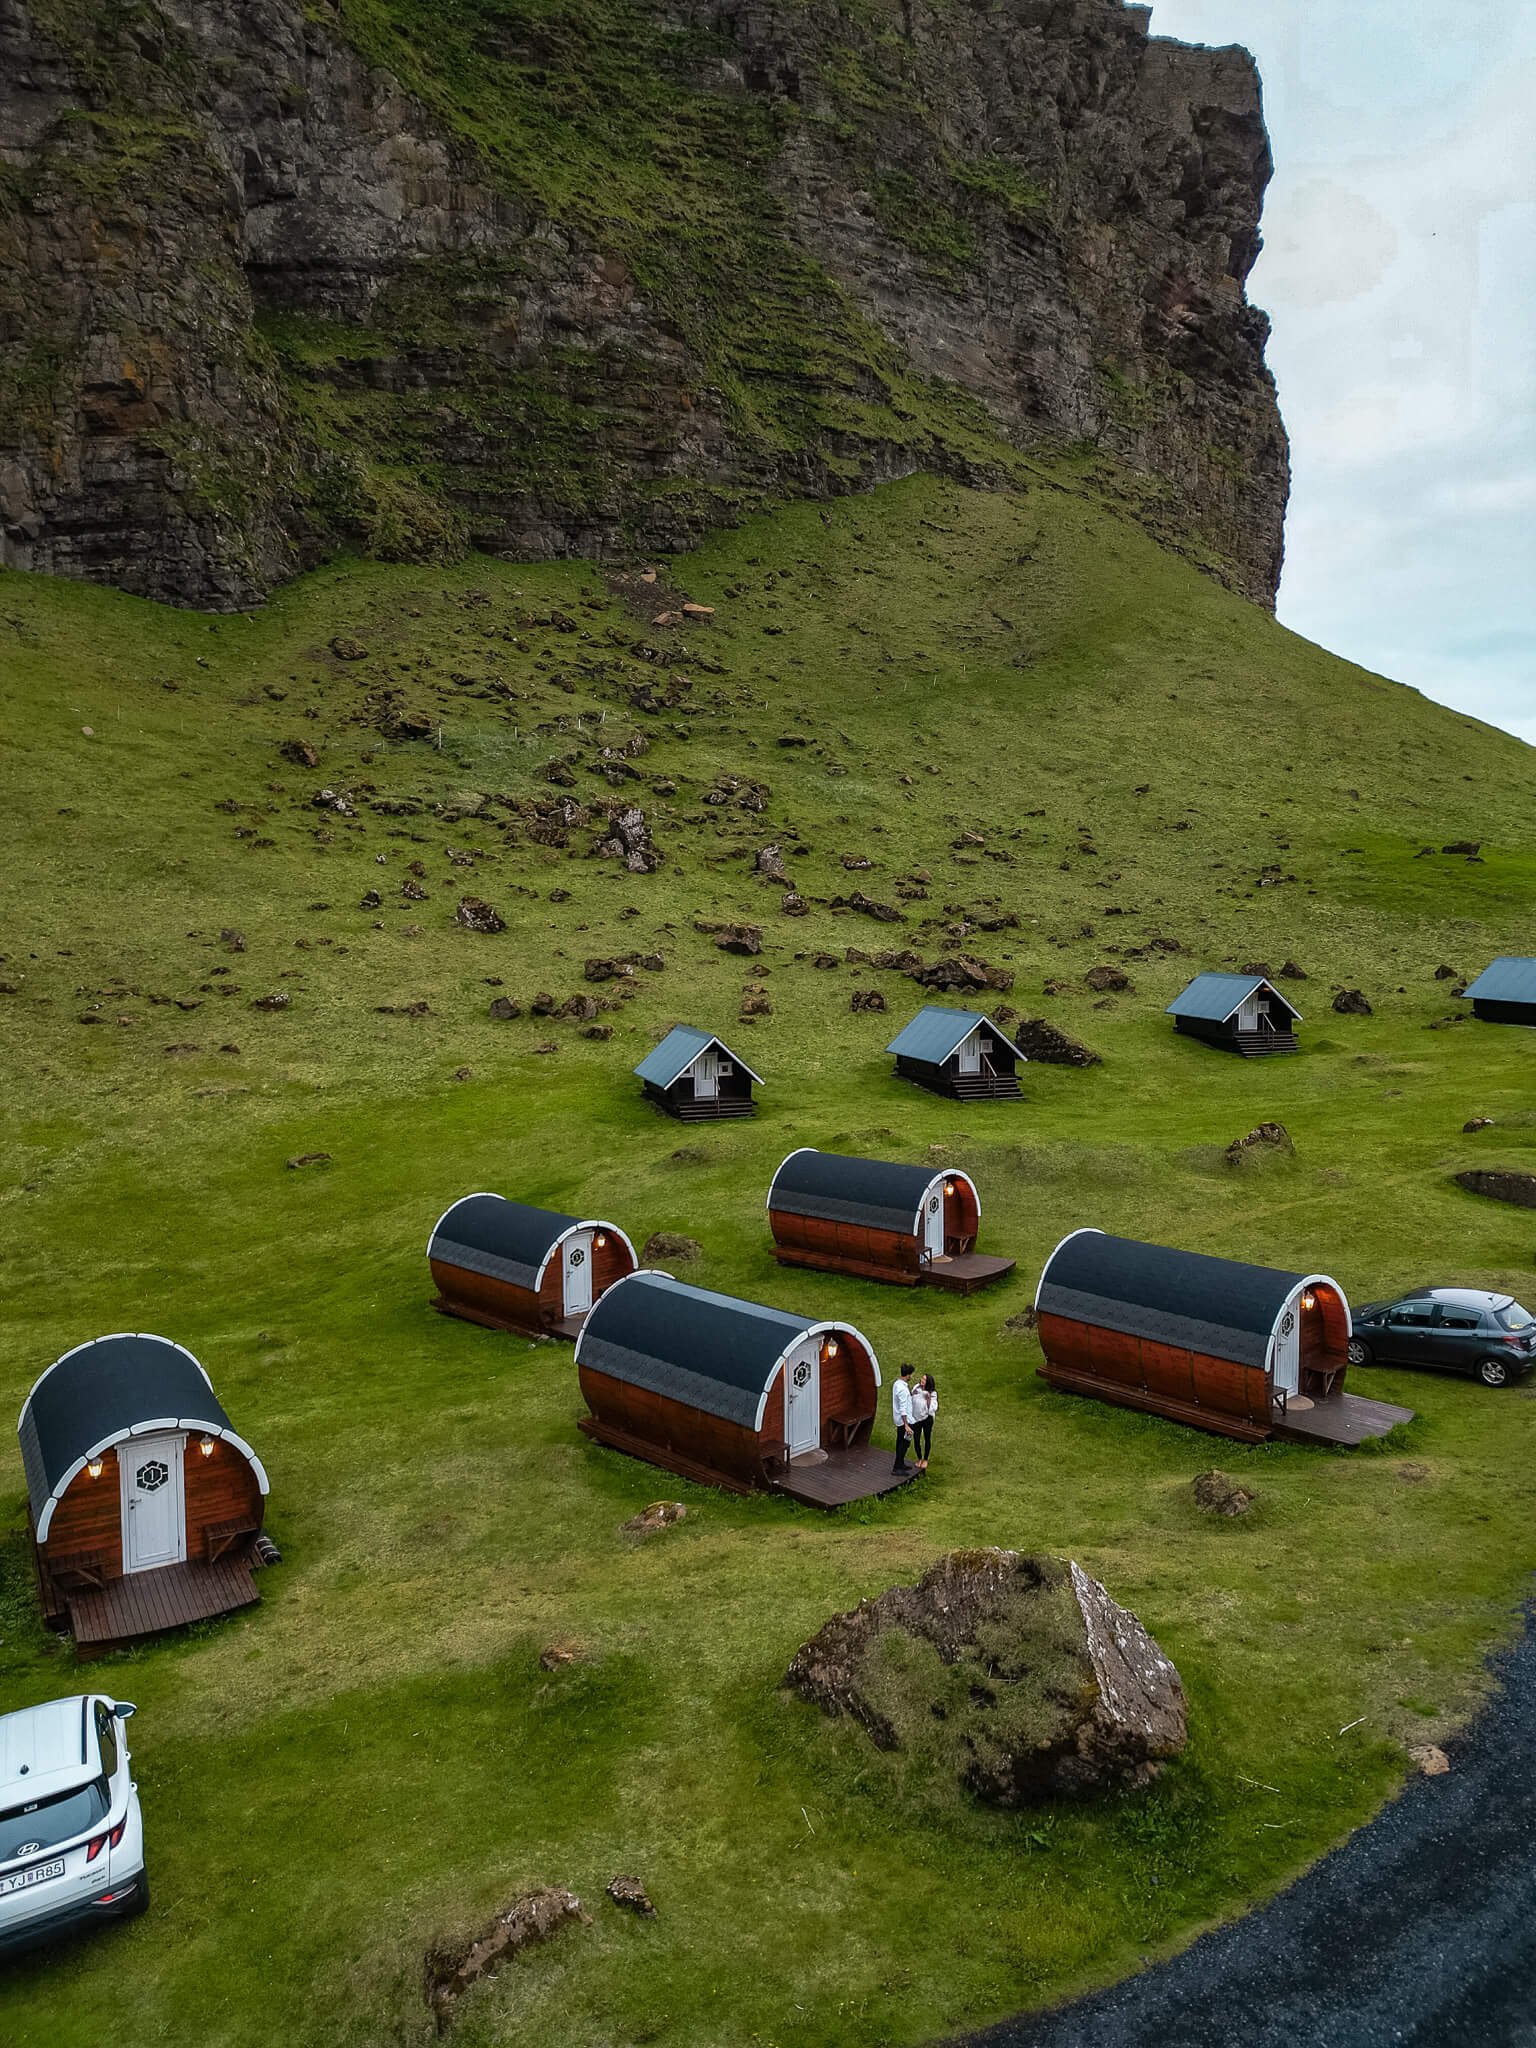 Glamping in the Westman Islands in Iceland